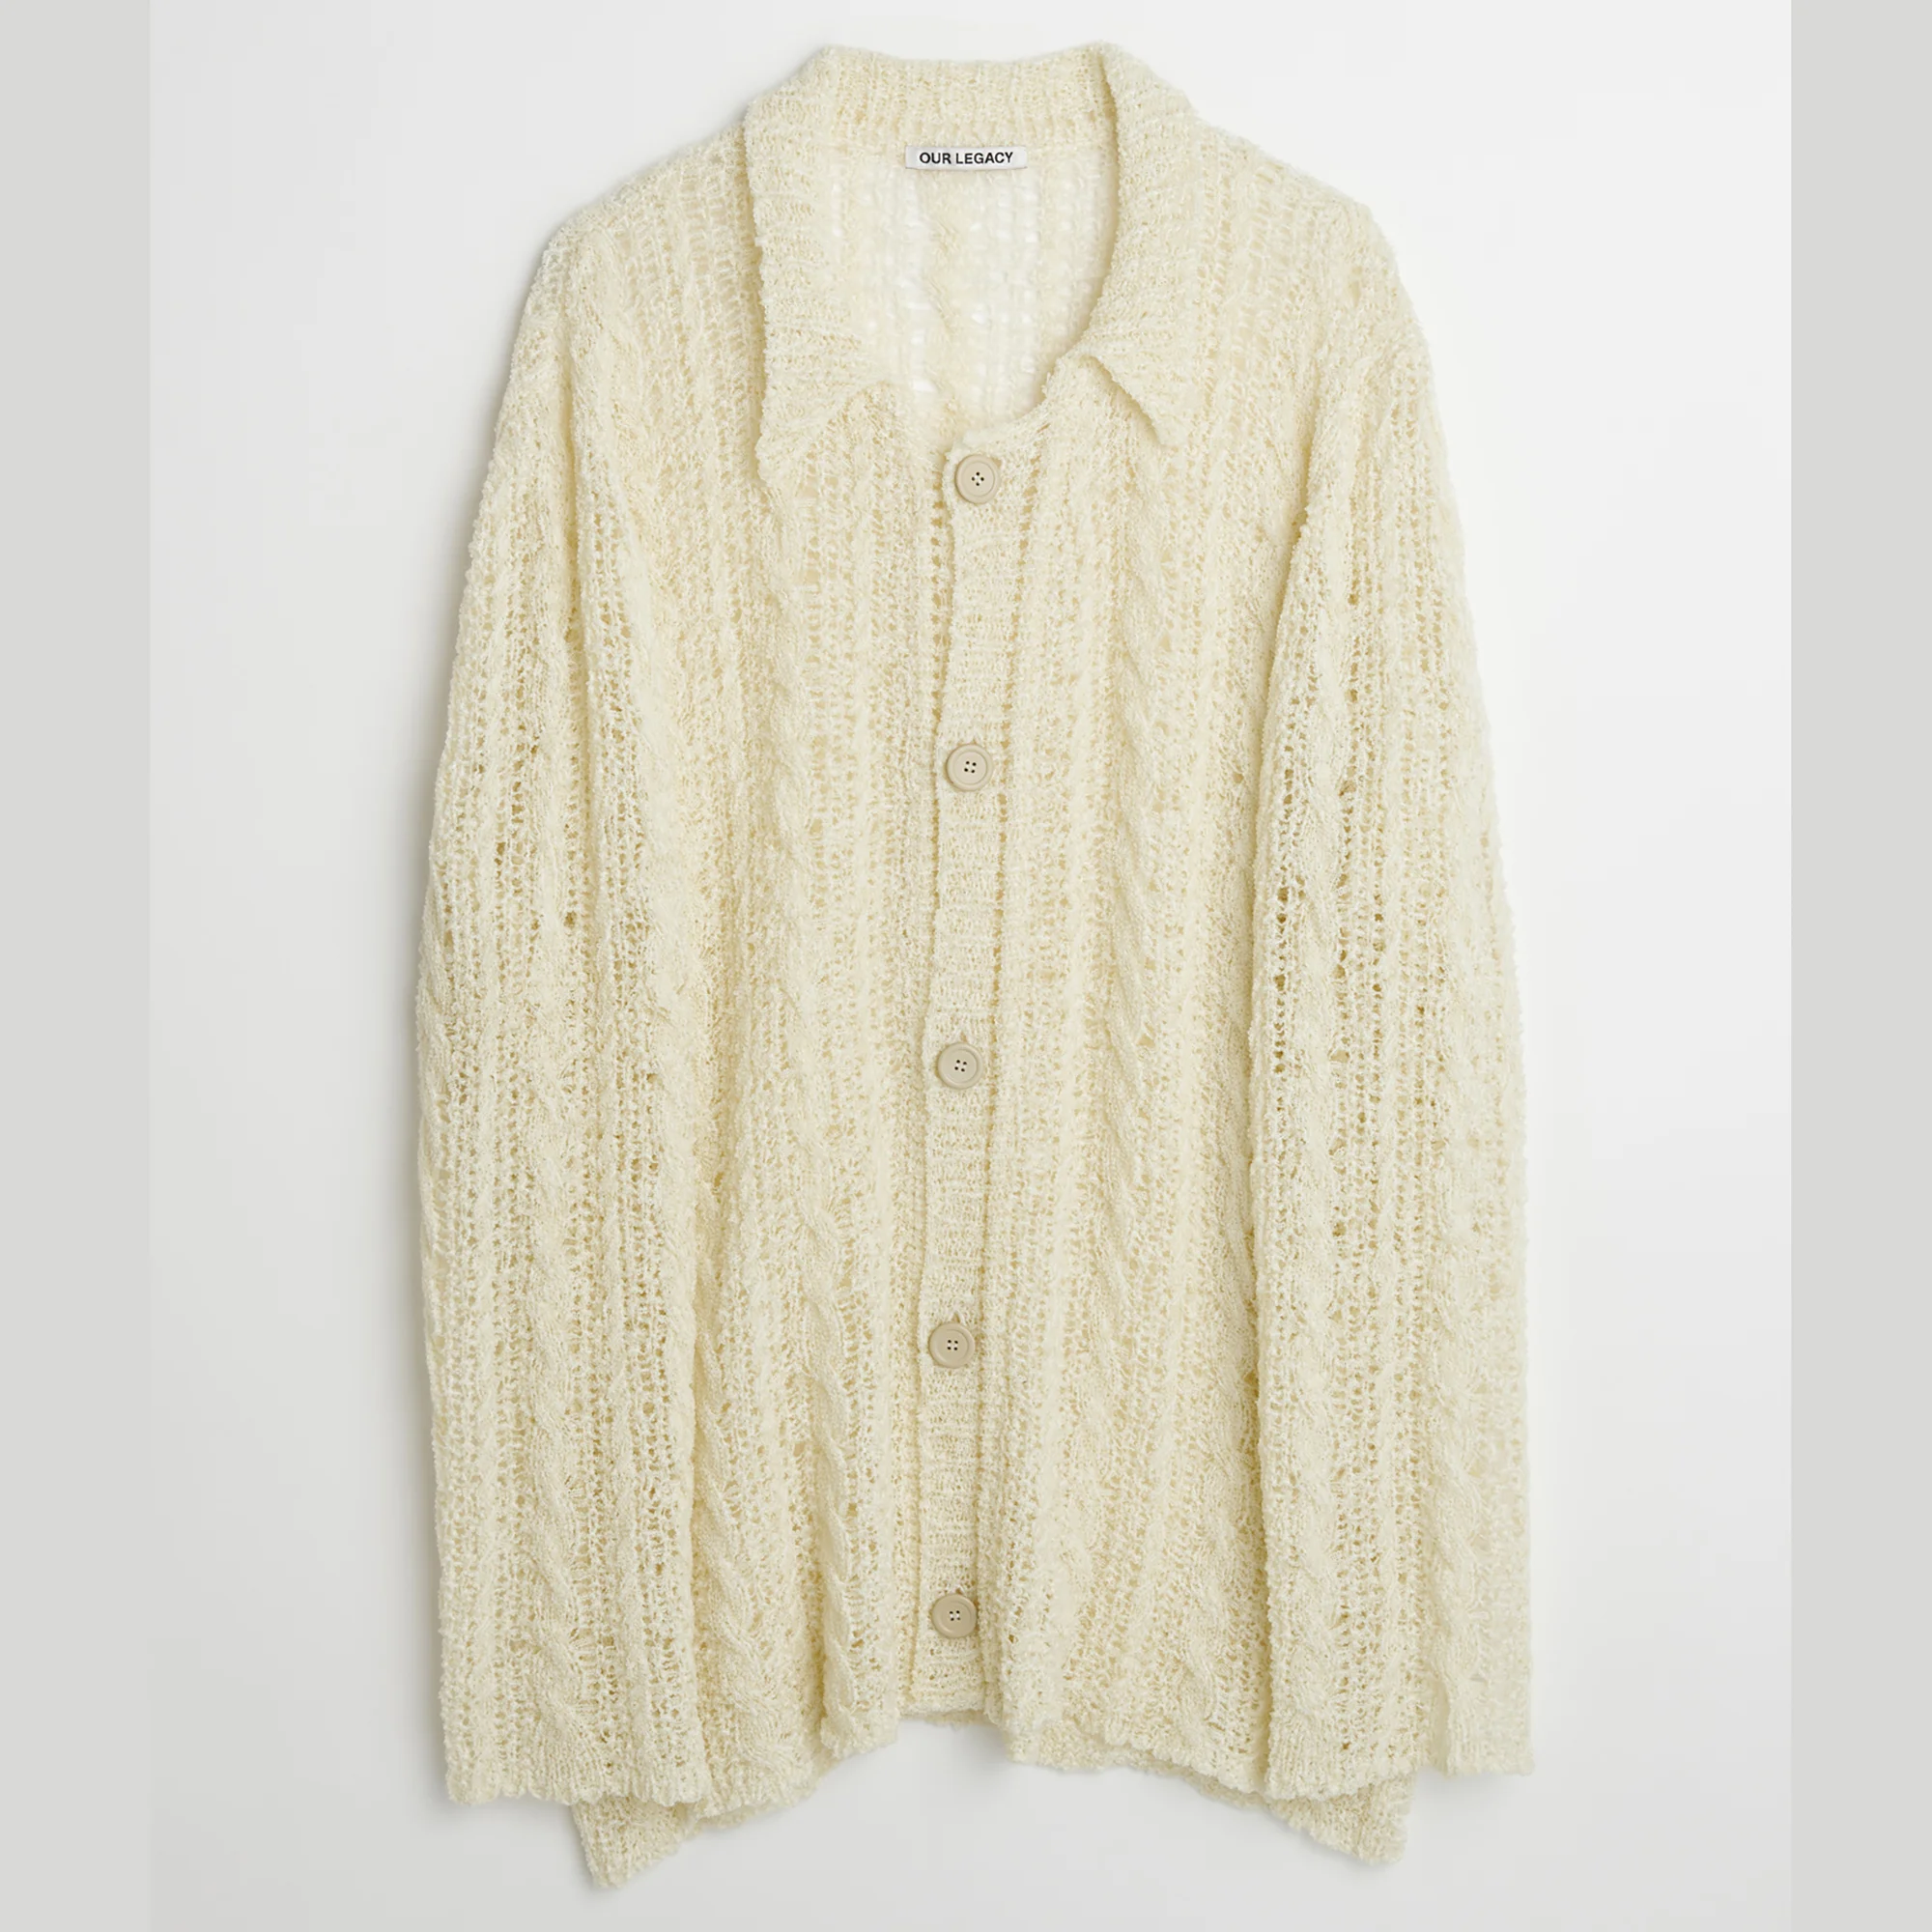 Our Legacy Big Sheer Cable Knit Cardigan Image 1